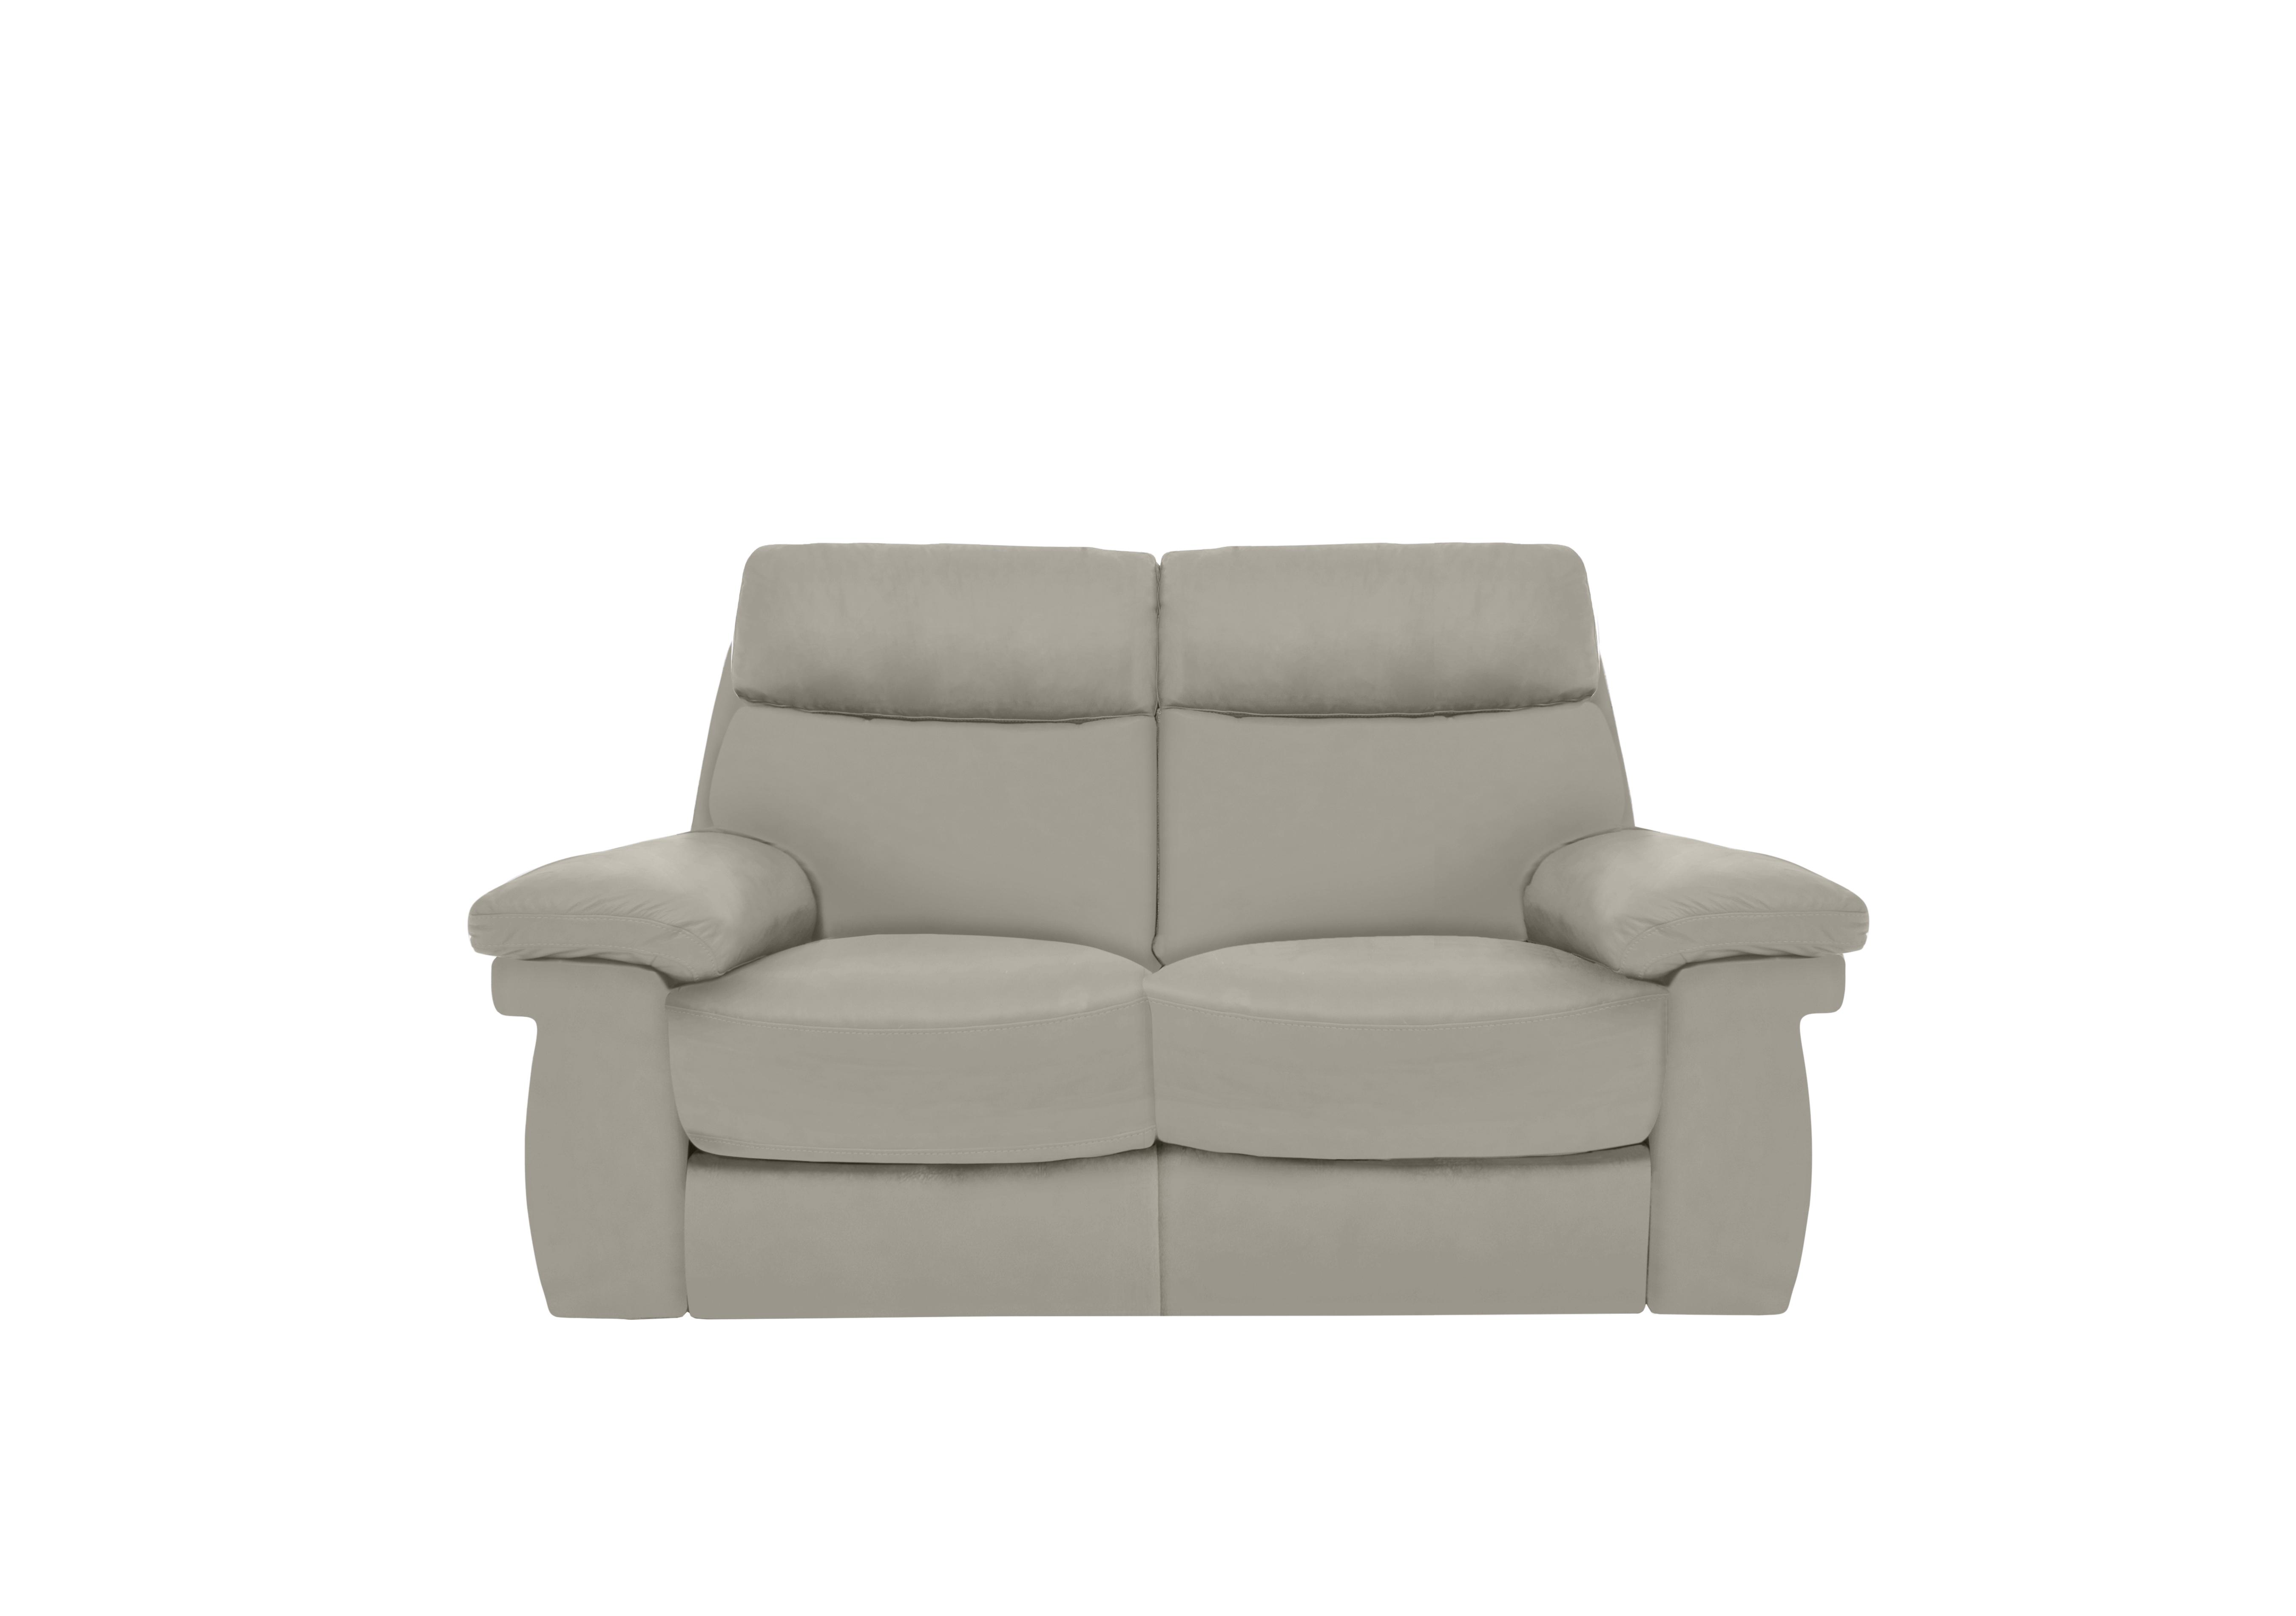 Serene 2 Seater Leather Power Recliner Sofa with Power Headrests in Bx-251e Grey on Furniture Village